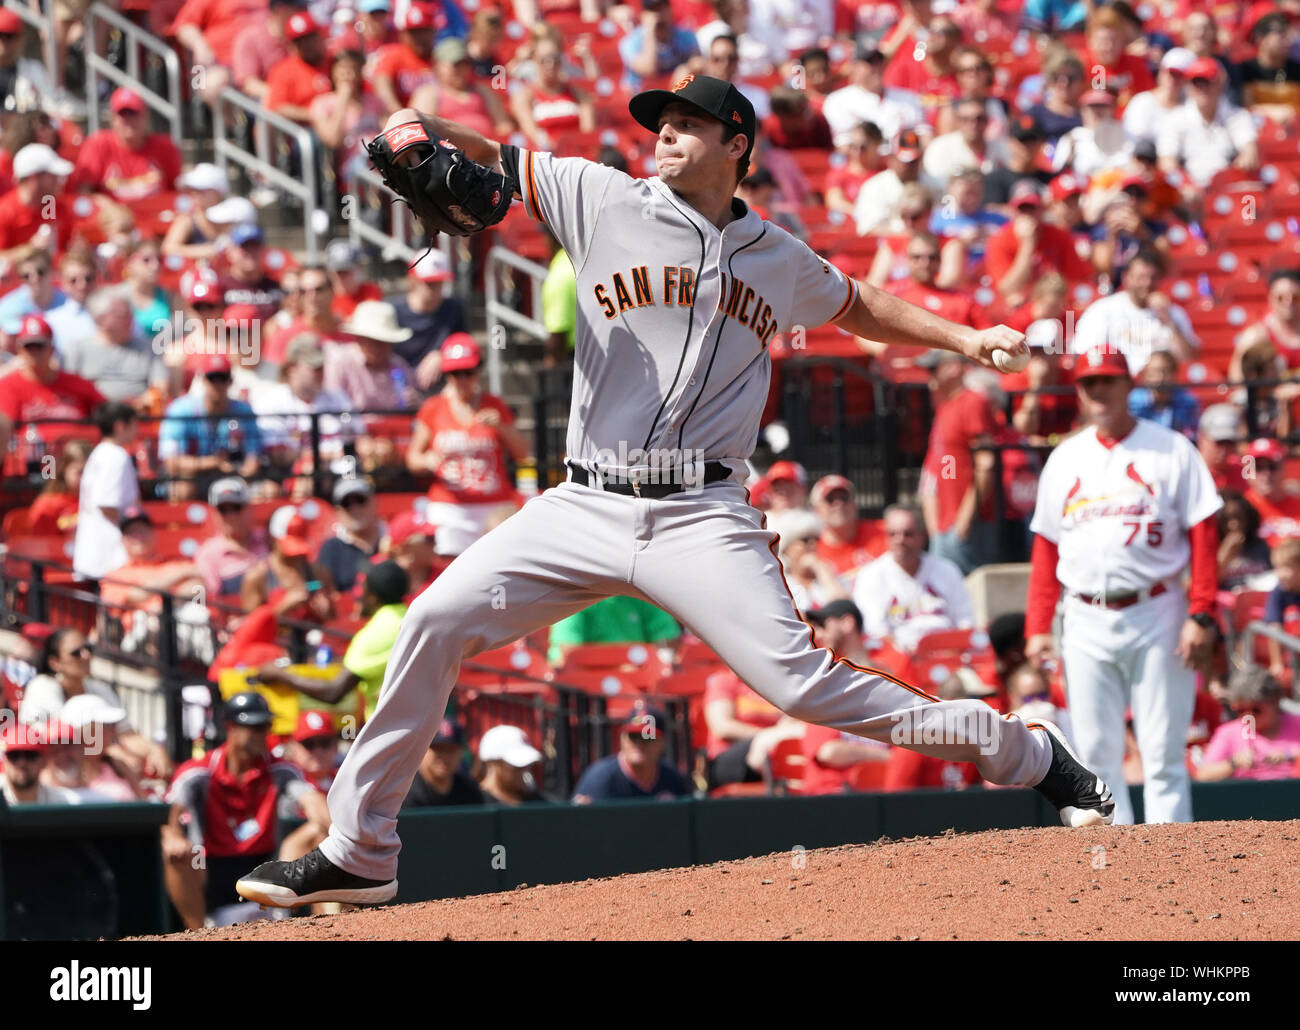 St. Louis, United States. 02nd Sep, 2019. San Francisco Giants pitcher Andrew Suarez delivers a pitch to the St. Louis Cardinals in the fifth inning at Busch Stadium in St. Louis on Monday, September 2, 2019. St. Louis defeated San Francisco 3-1. Photo by Bill Greenblatt/UPI Credit: UPI/Alamy Live News Stock Photo